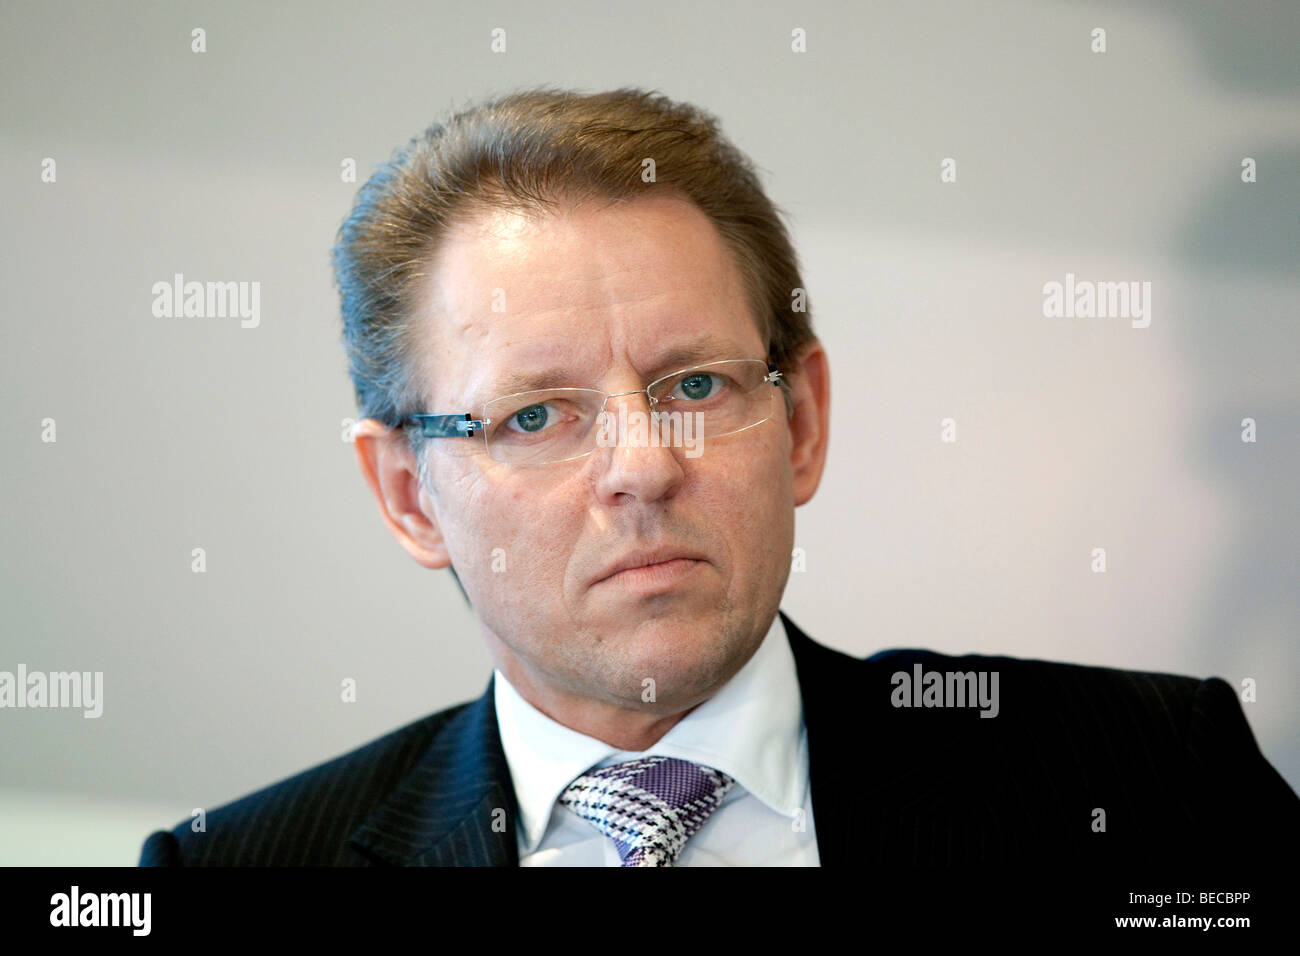 Stephan Gemkow, chief financial officer of Deutsche Lufthansa AG, during the press conference on financial statements on 11.03. Stock Photo